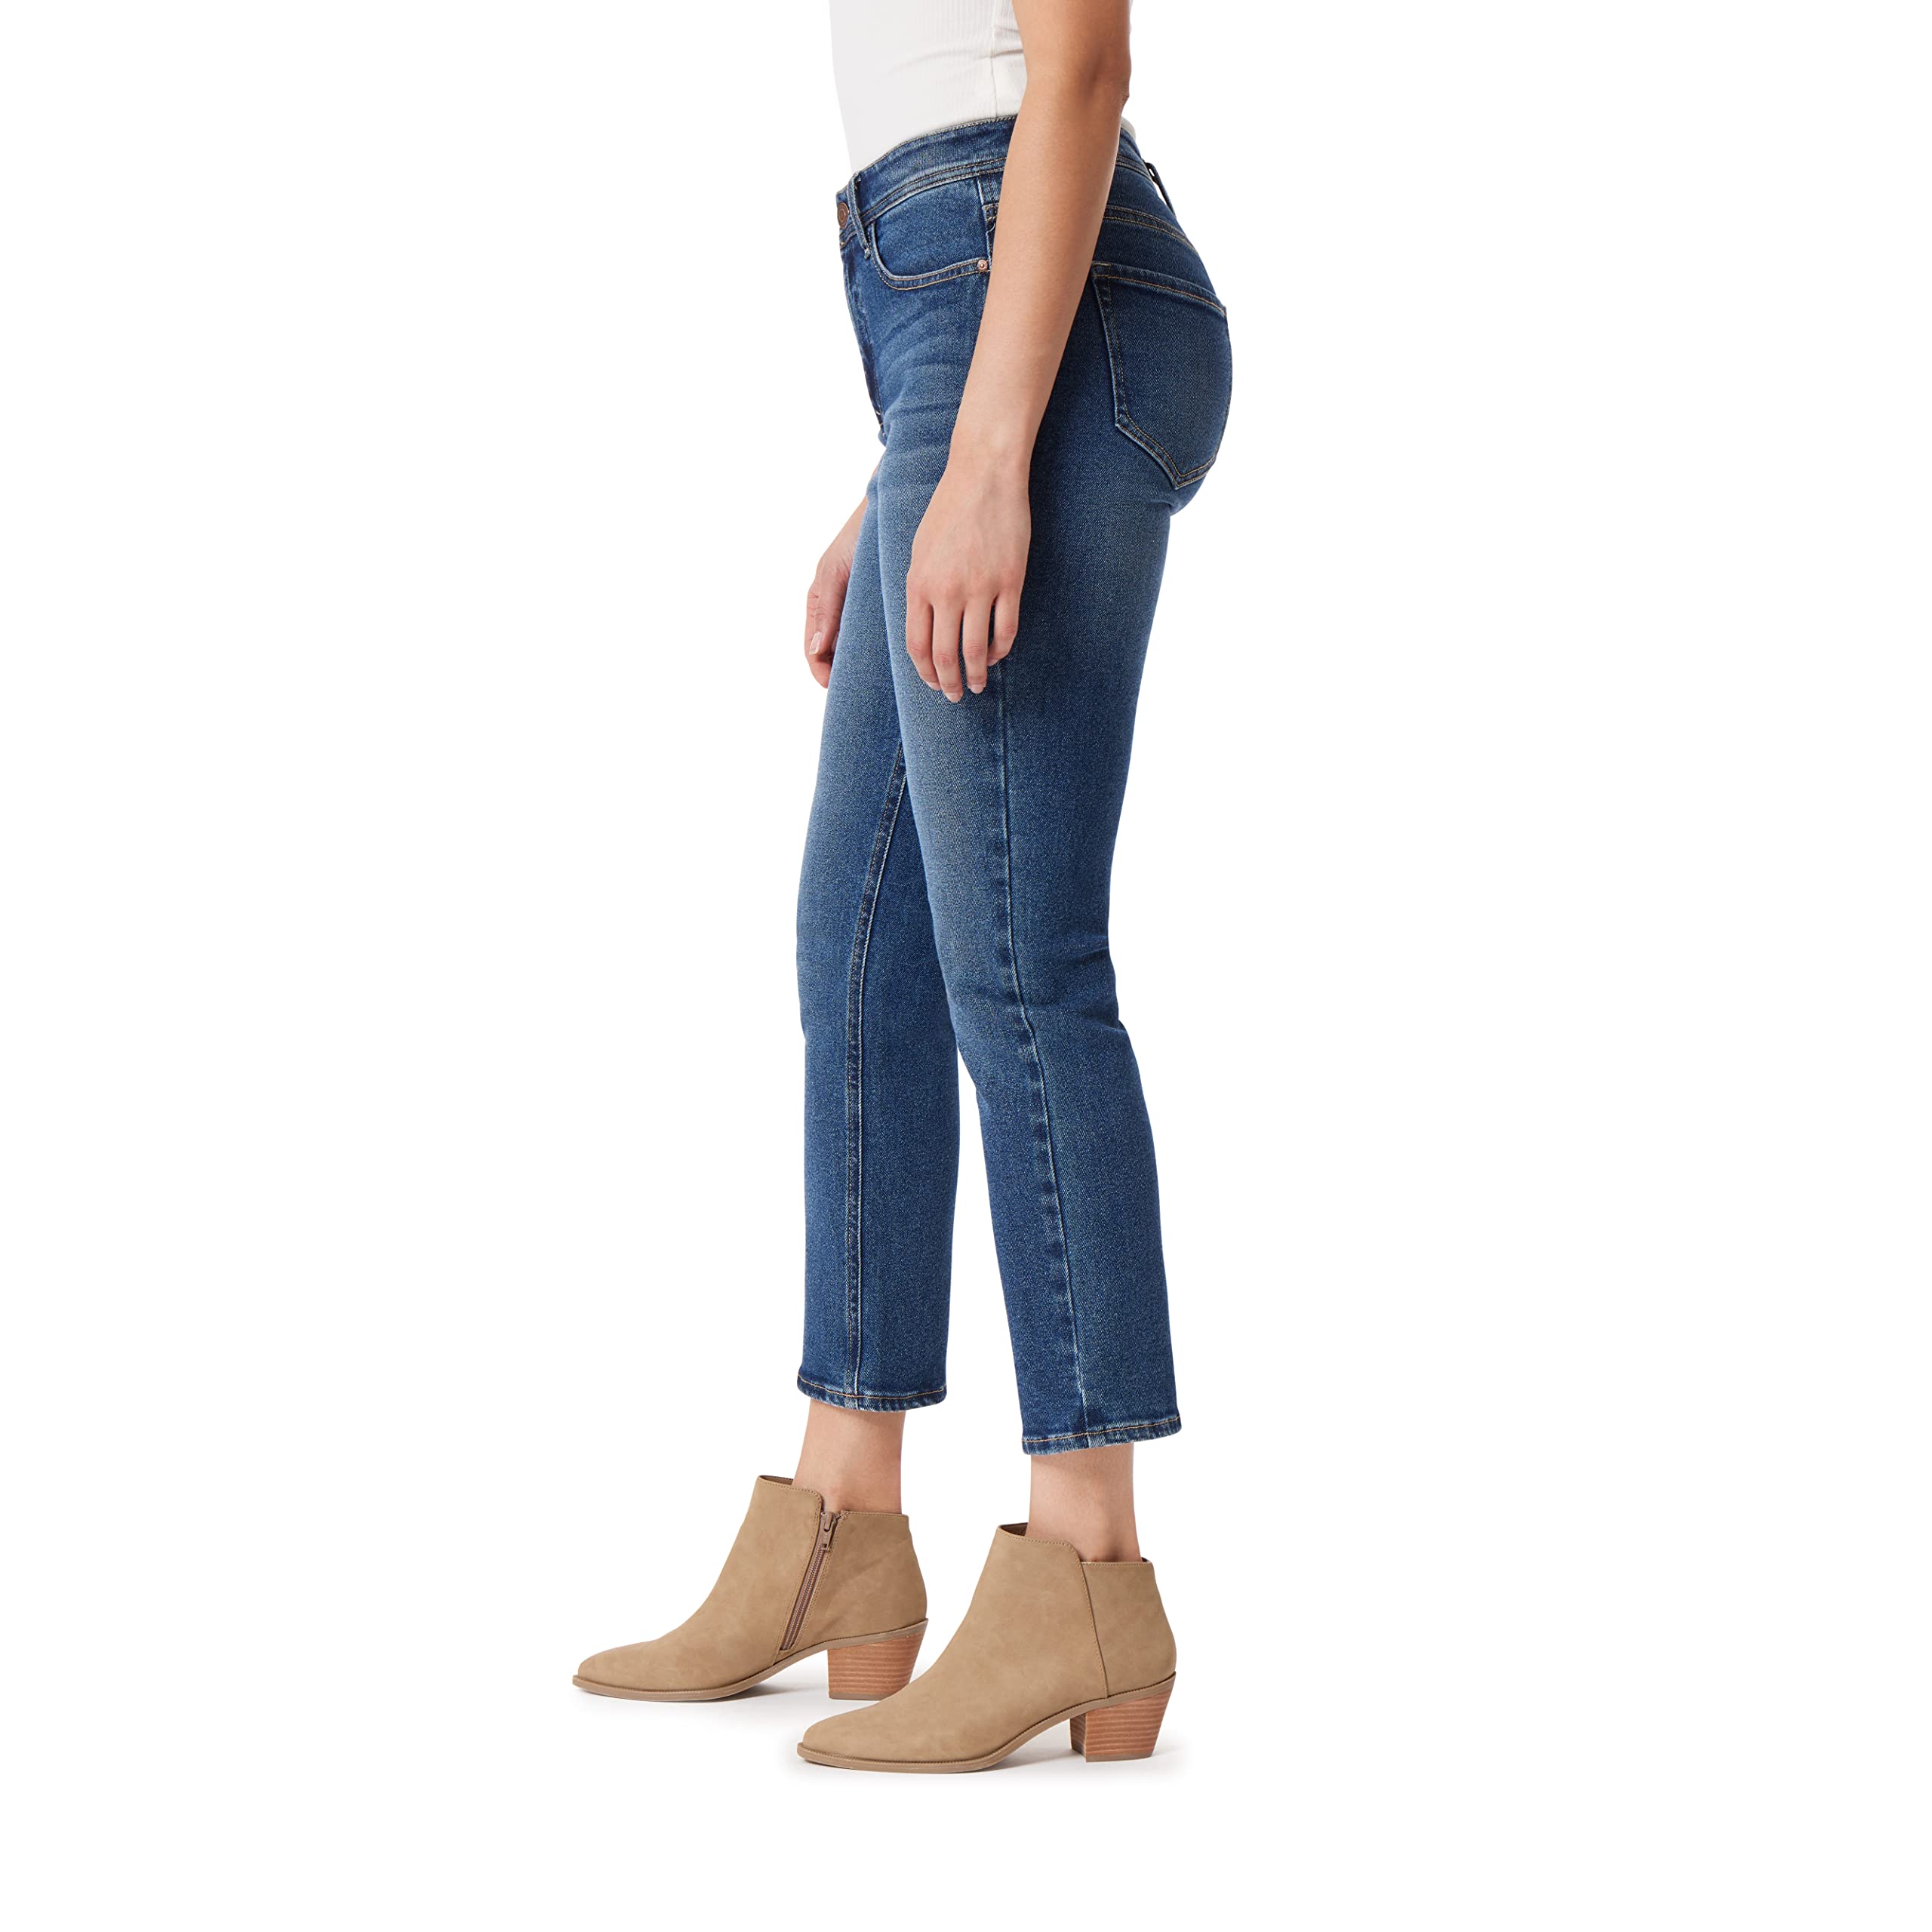 Angels Forever Young Women's Forever Slim Ankle High-Rise Jeans (Standard and Plus)